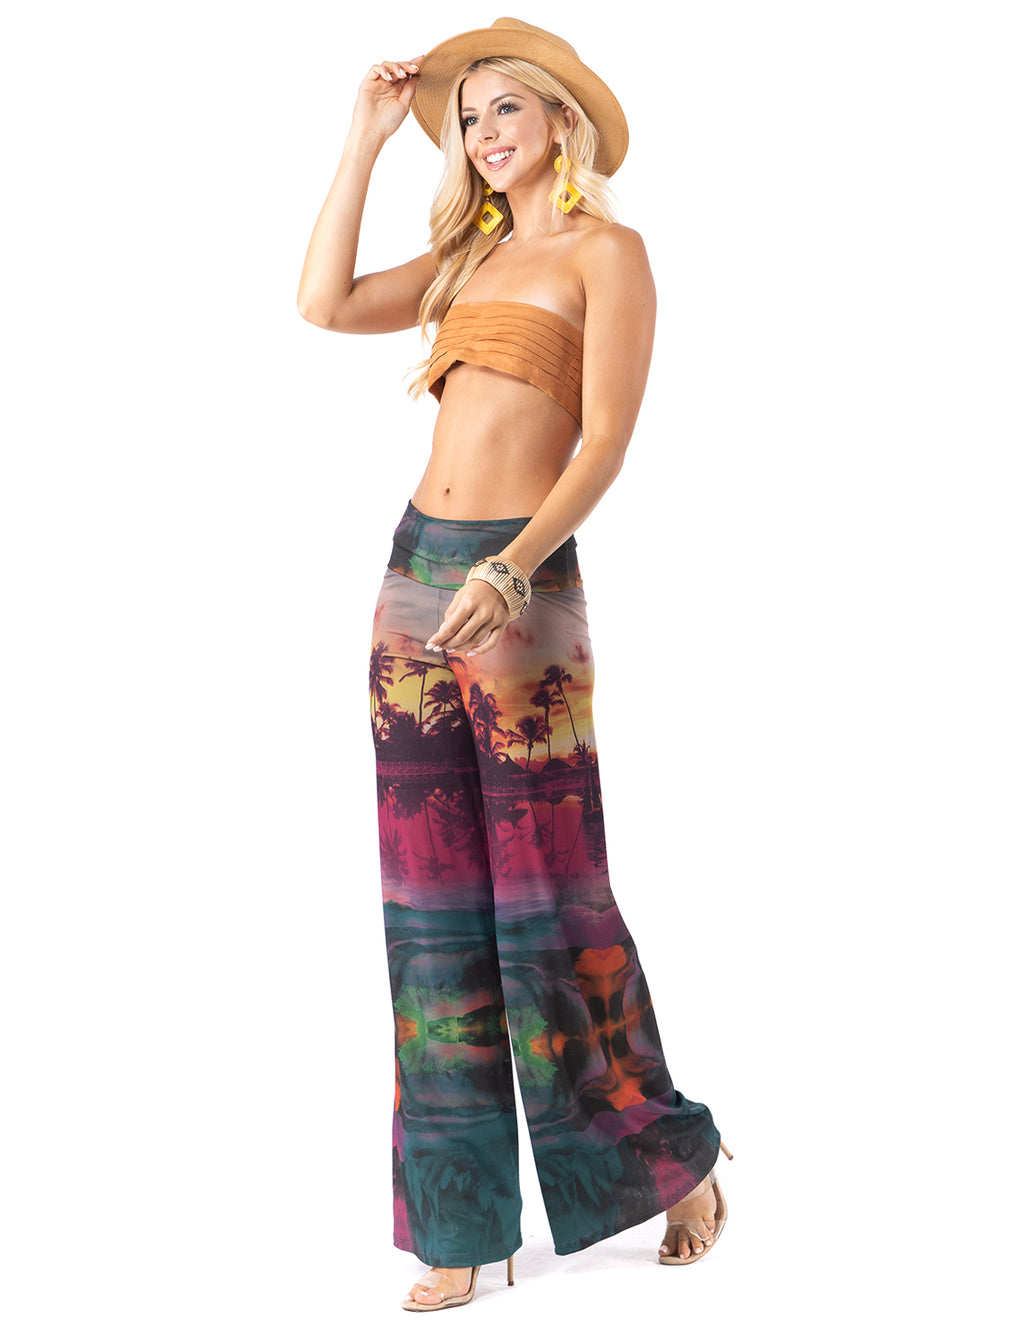 MultiColor Sunset vibe High waist palazzo pants featuring wide legs, and a comfortable stretchy fabric Perfect during spring, summer,Concerts, Festivals, Dance, Brunch